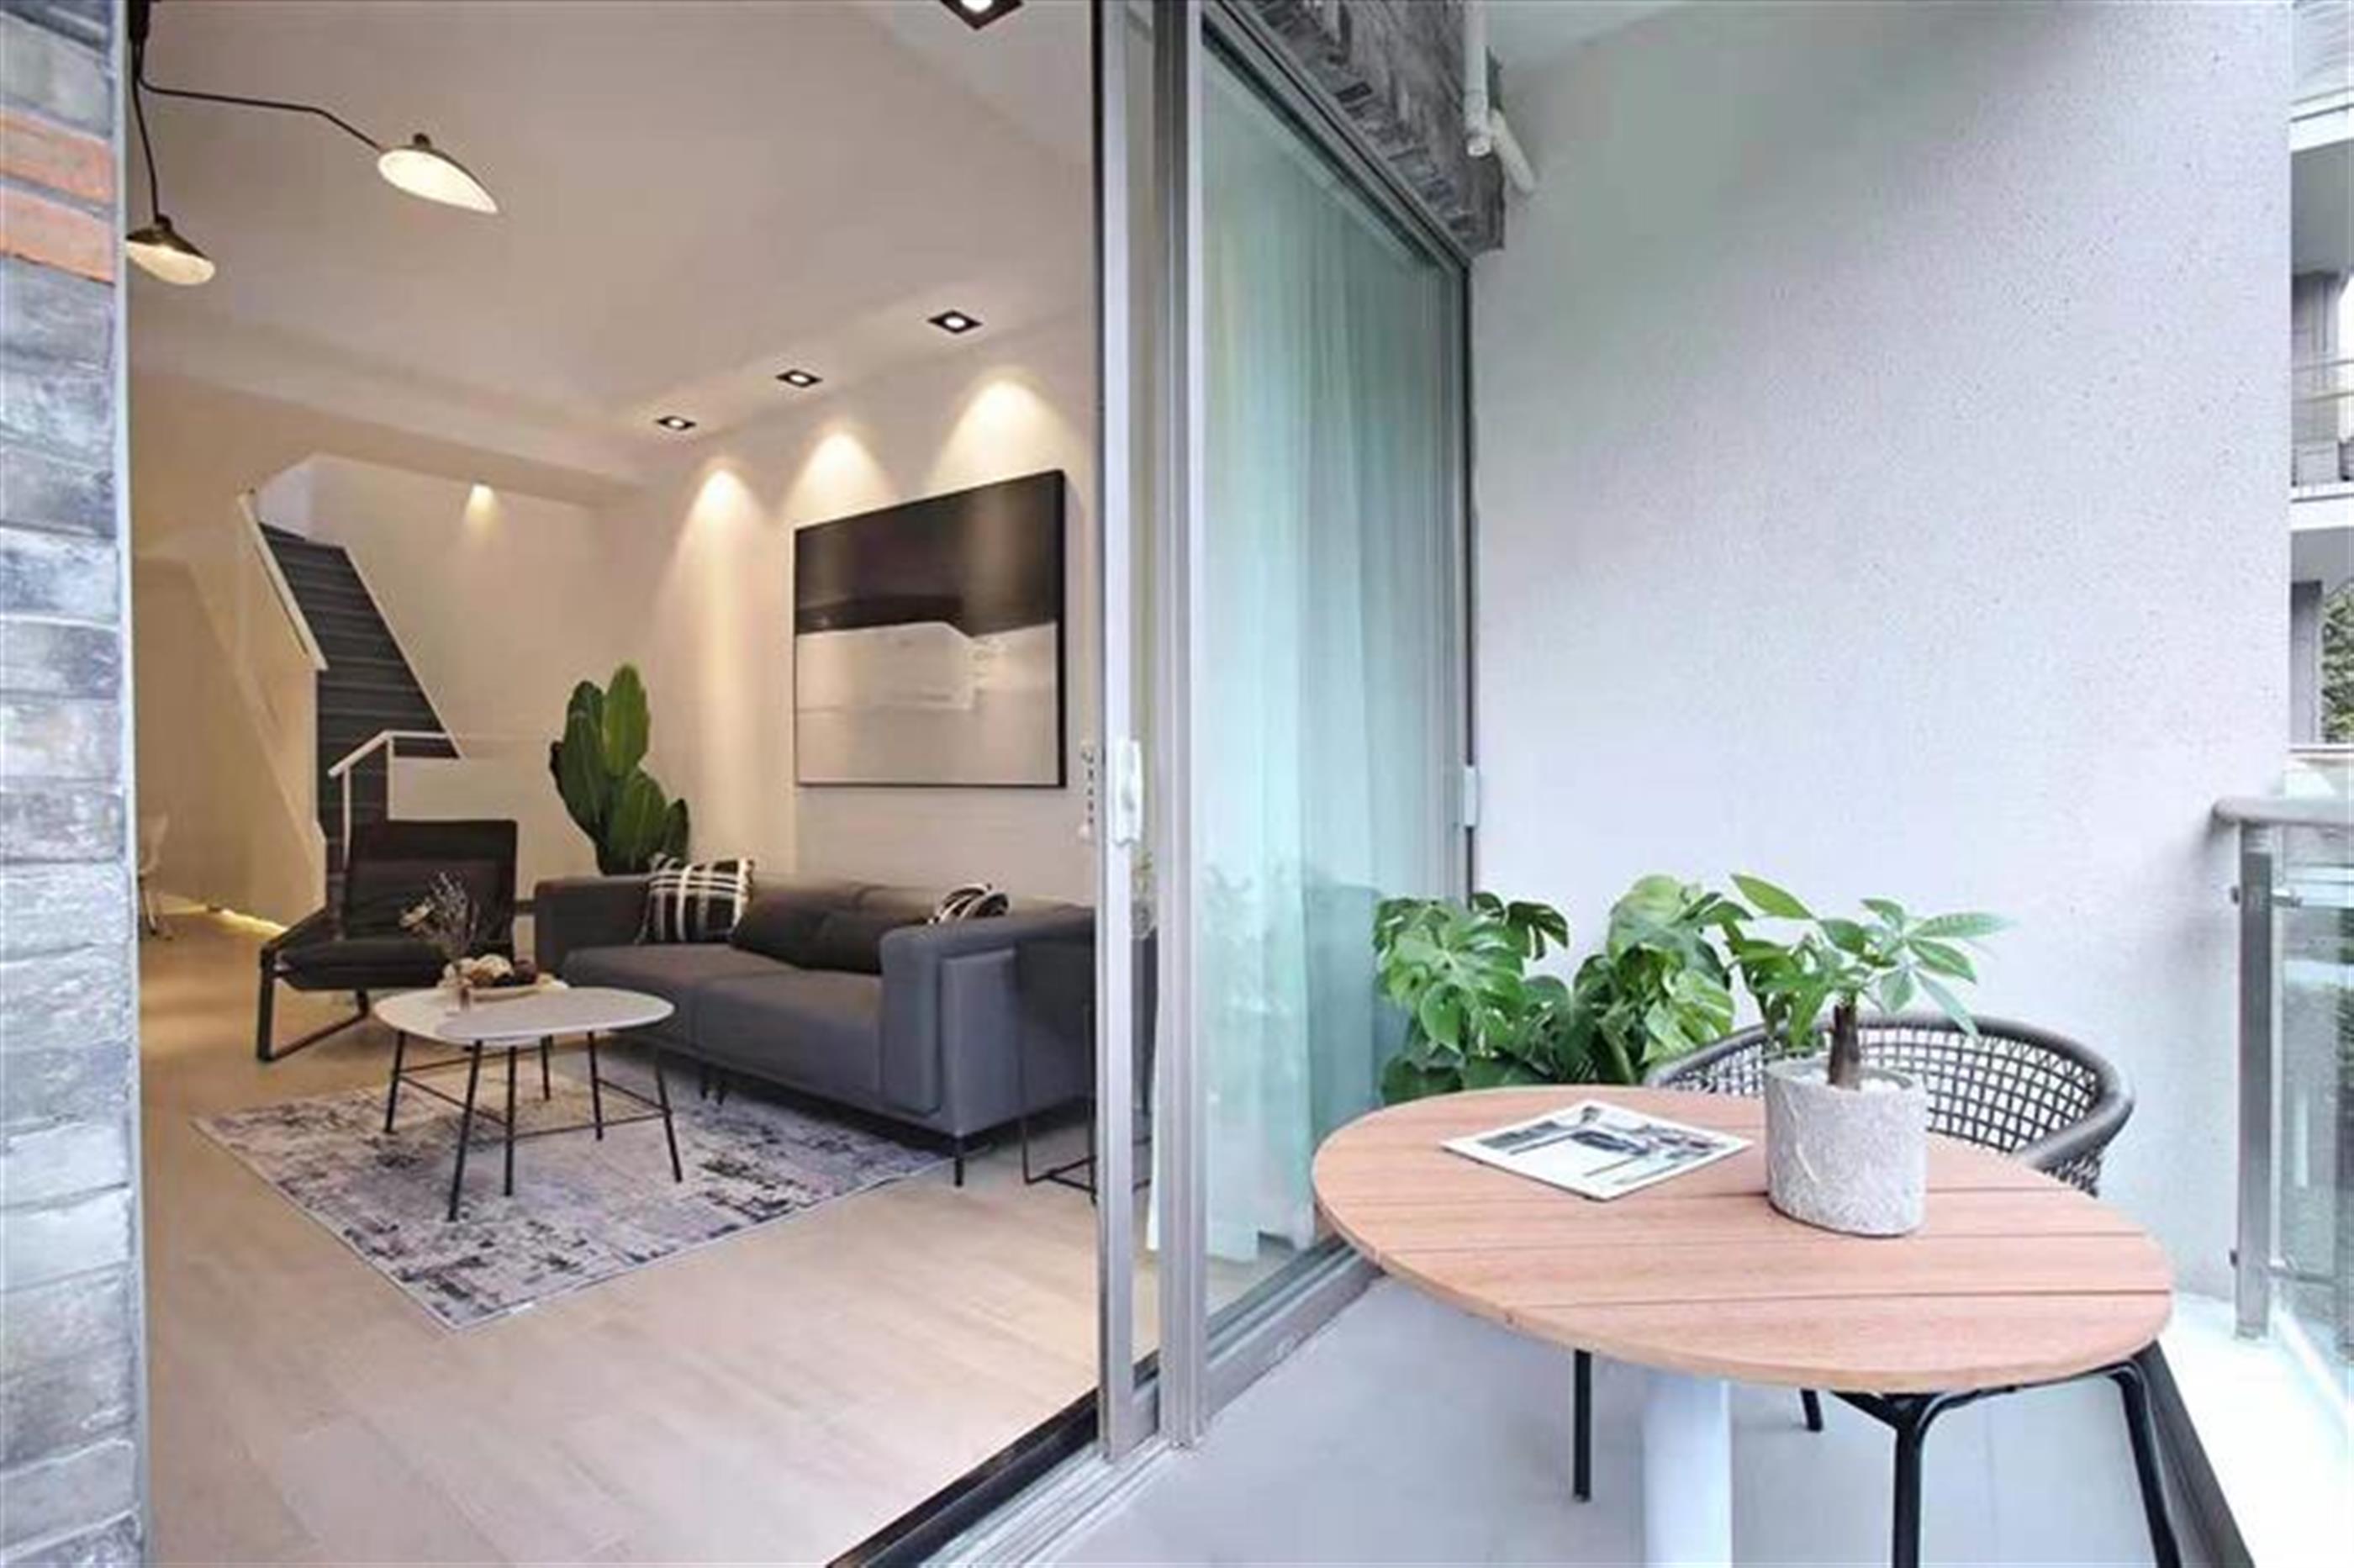 balcony from bedroom Newly-decorated Modern Bright Spacious 4BR Xintiandi Duplex for Rent in Shanghai LN 10/13